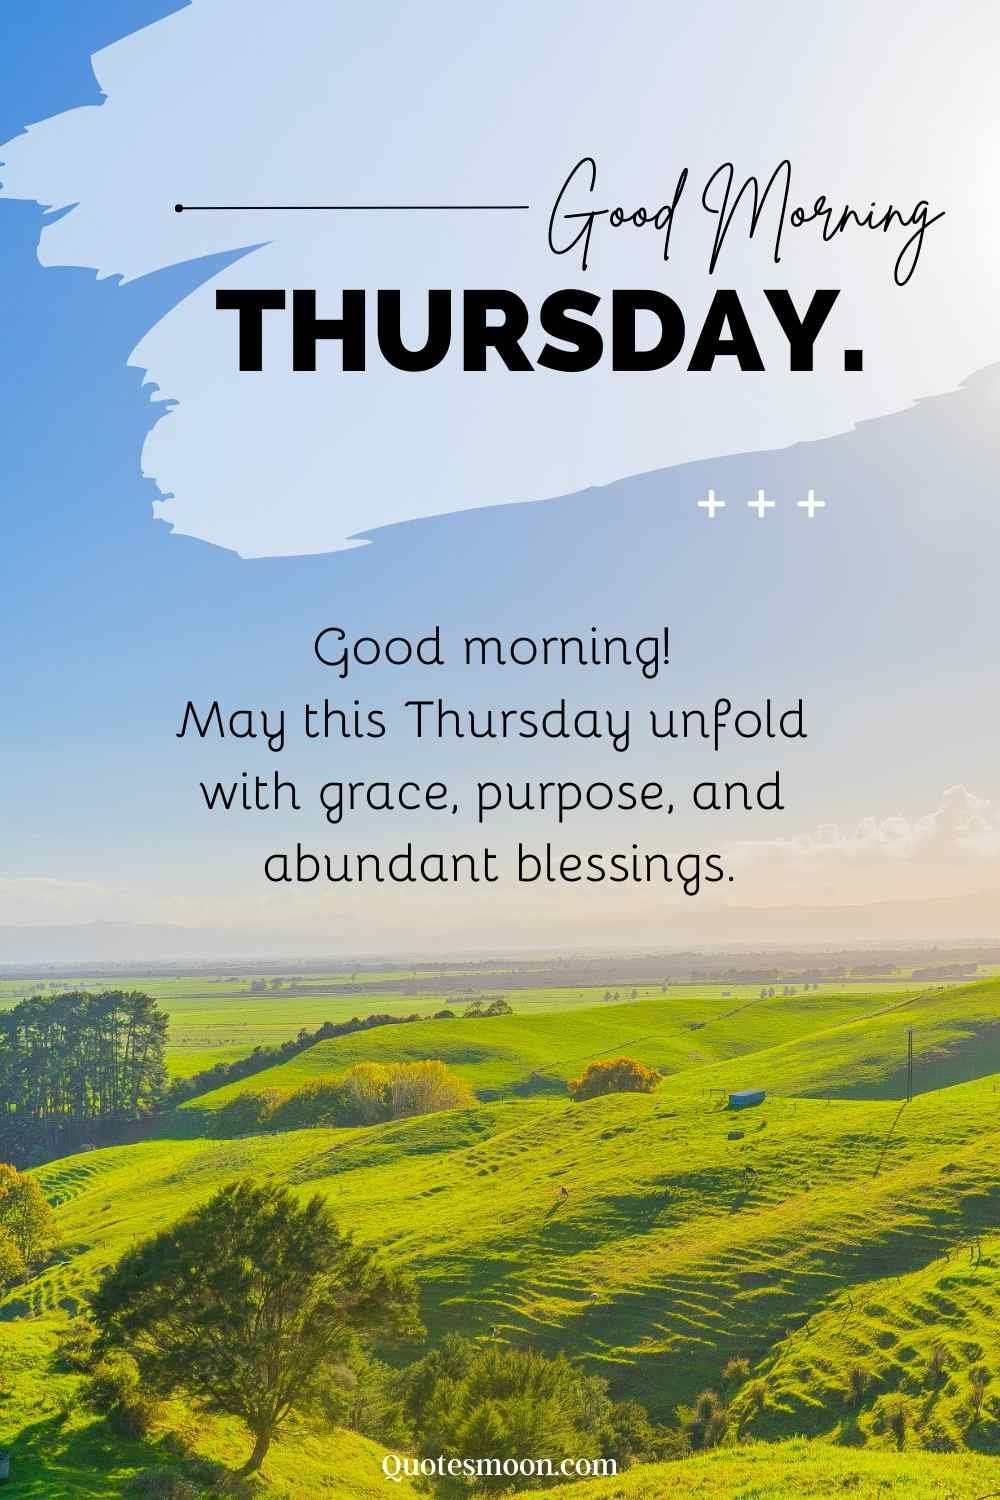 beautiful morning messages for thursday images new